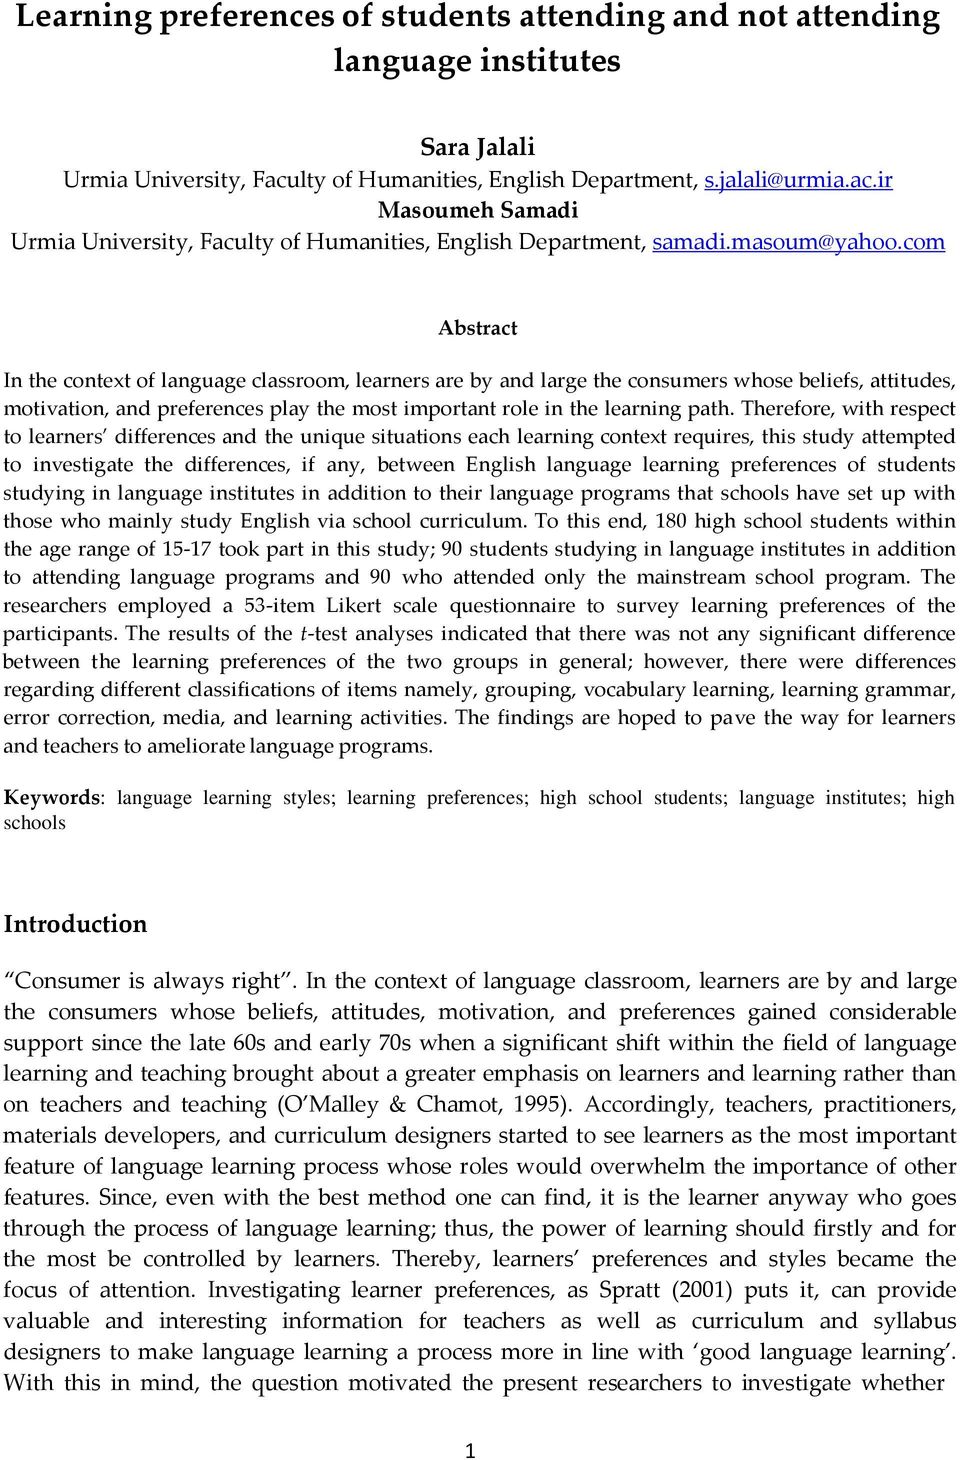 com Abstract In the context of language classroom, learners are by and large the consumers whose beliefs, attitudes, motivation, and preferences play the most important role in the learning path.